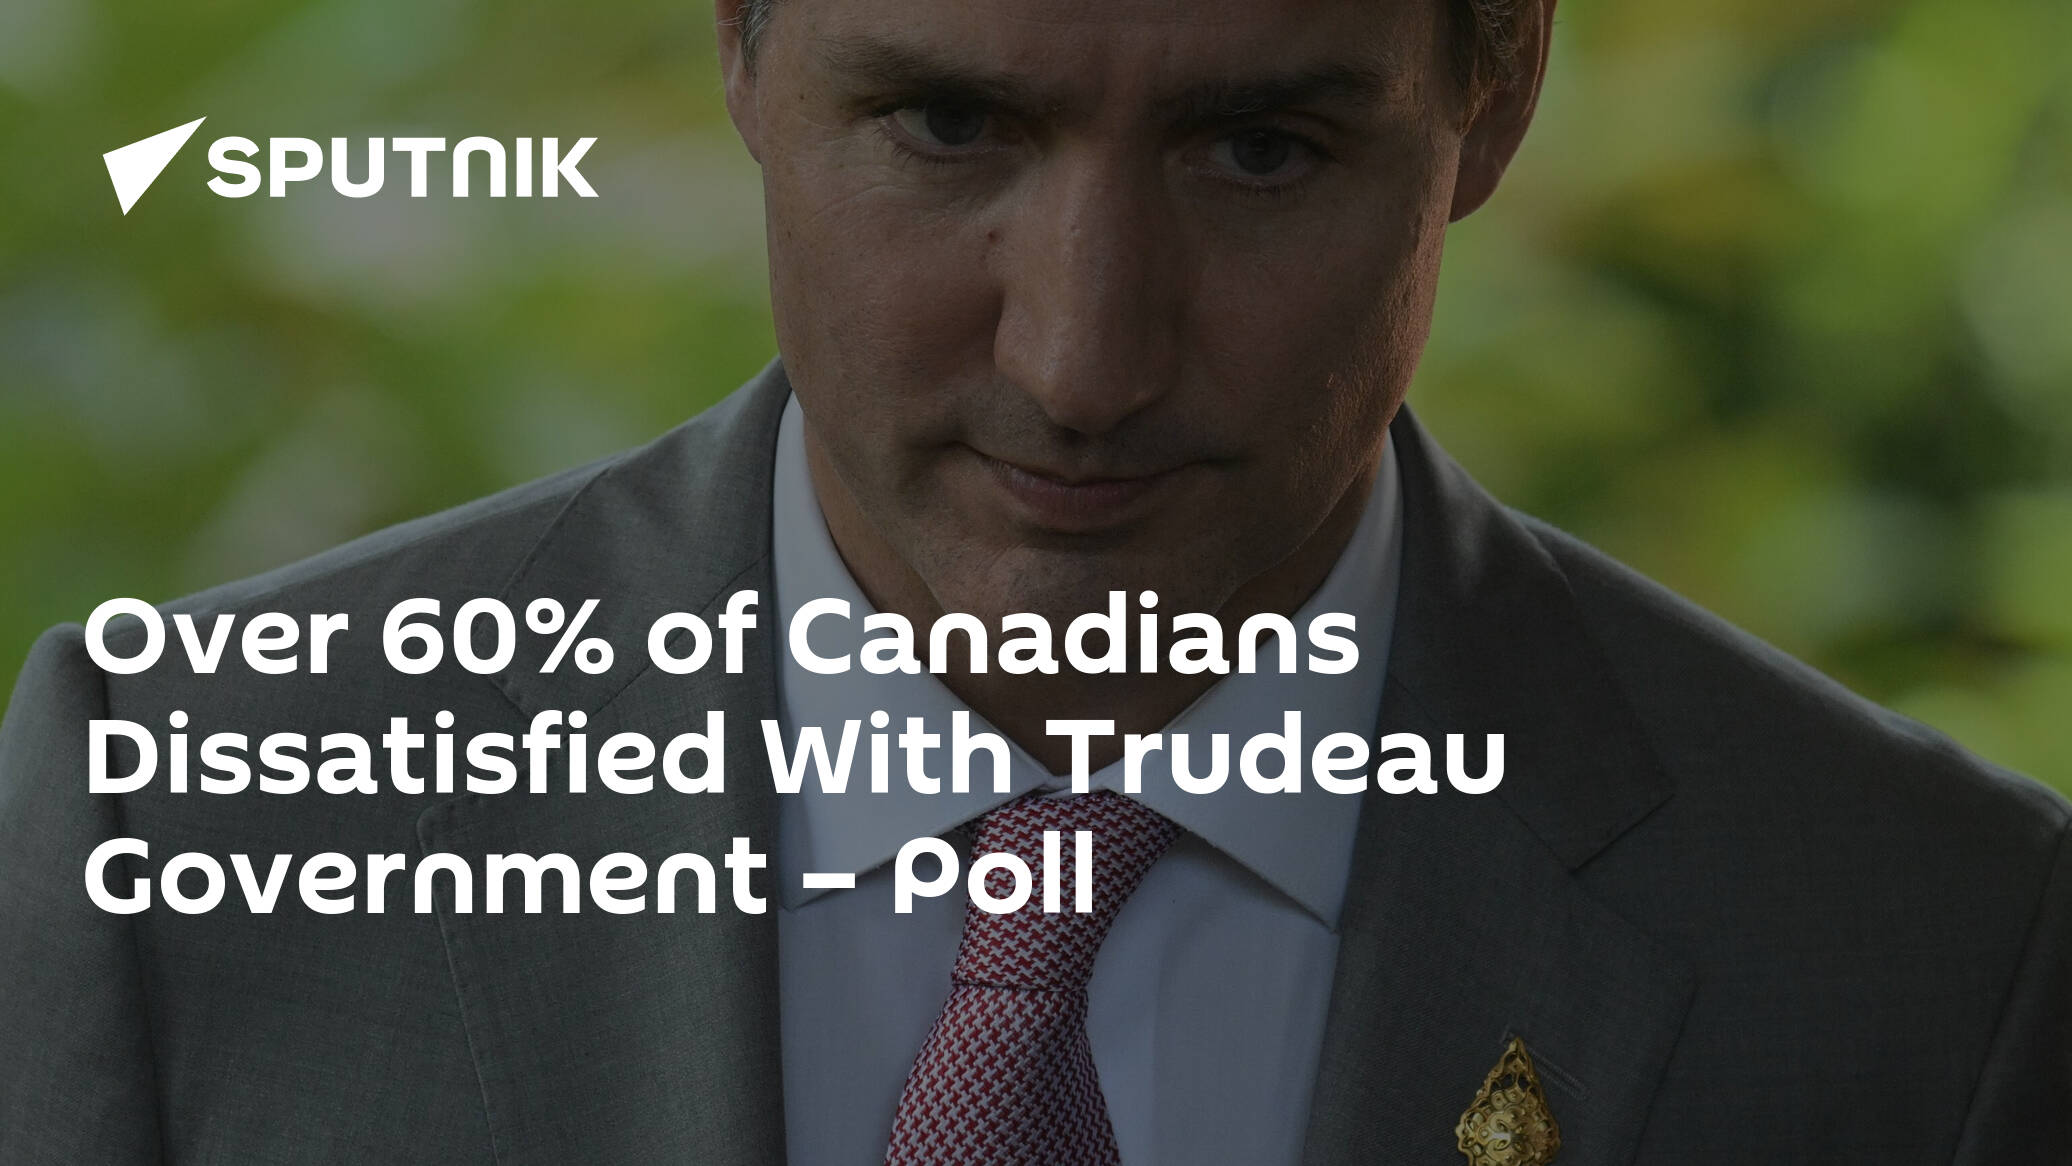 Over 60% of Canadians Dissatisfied With Trudeau Government – Poll